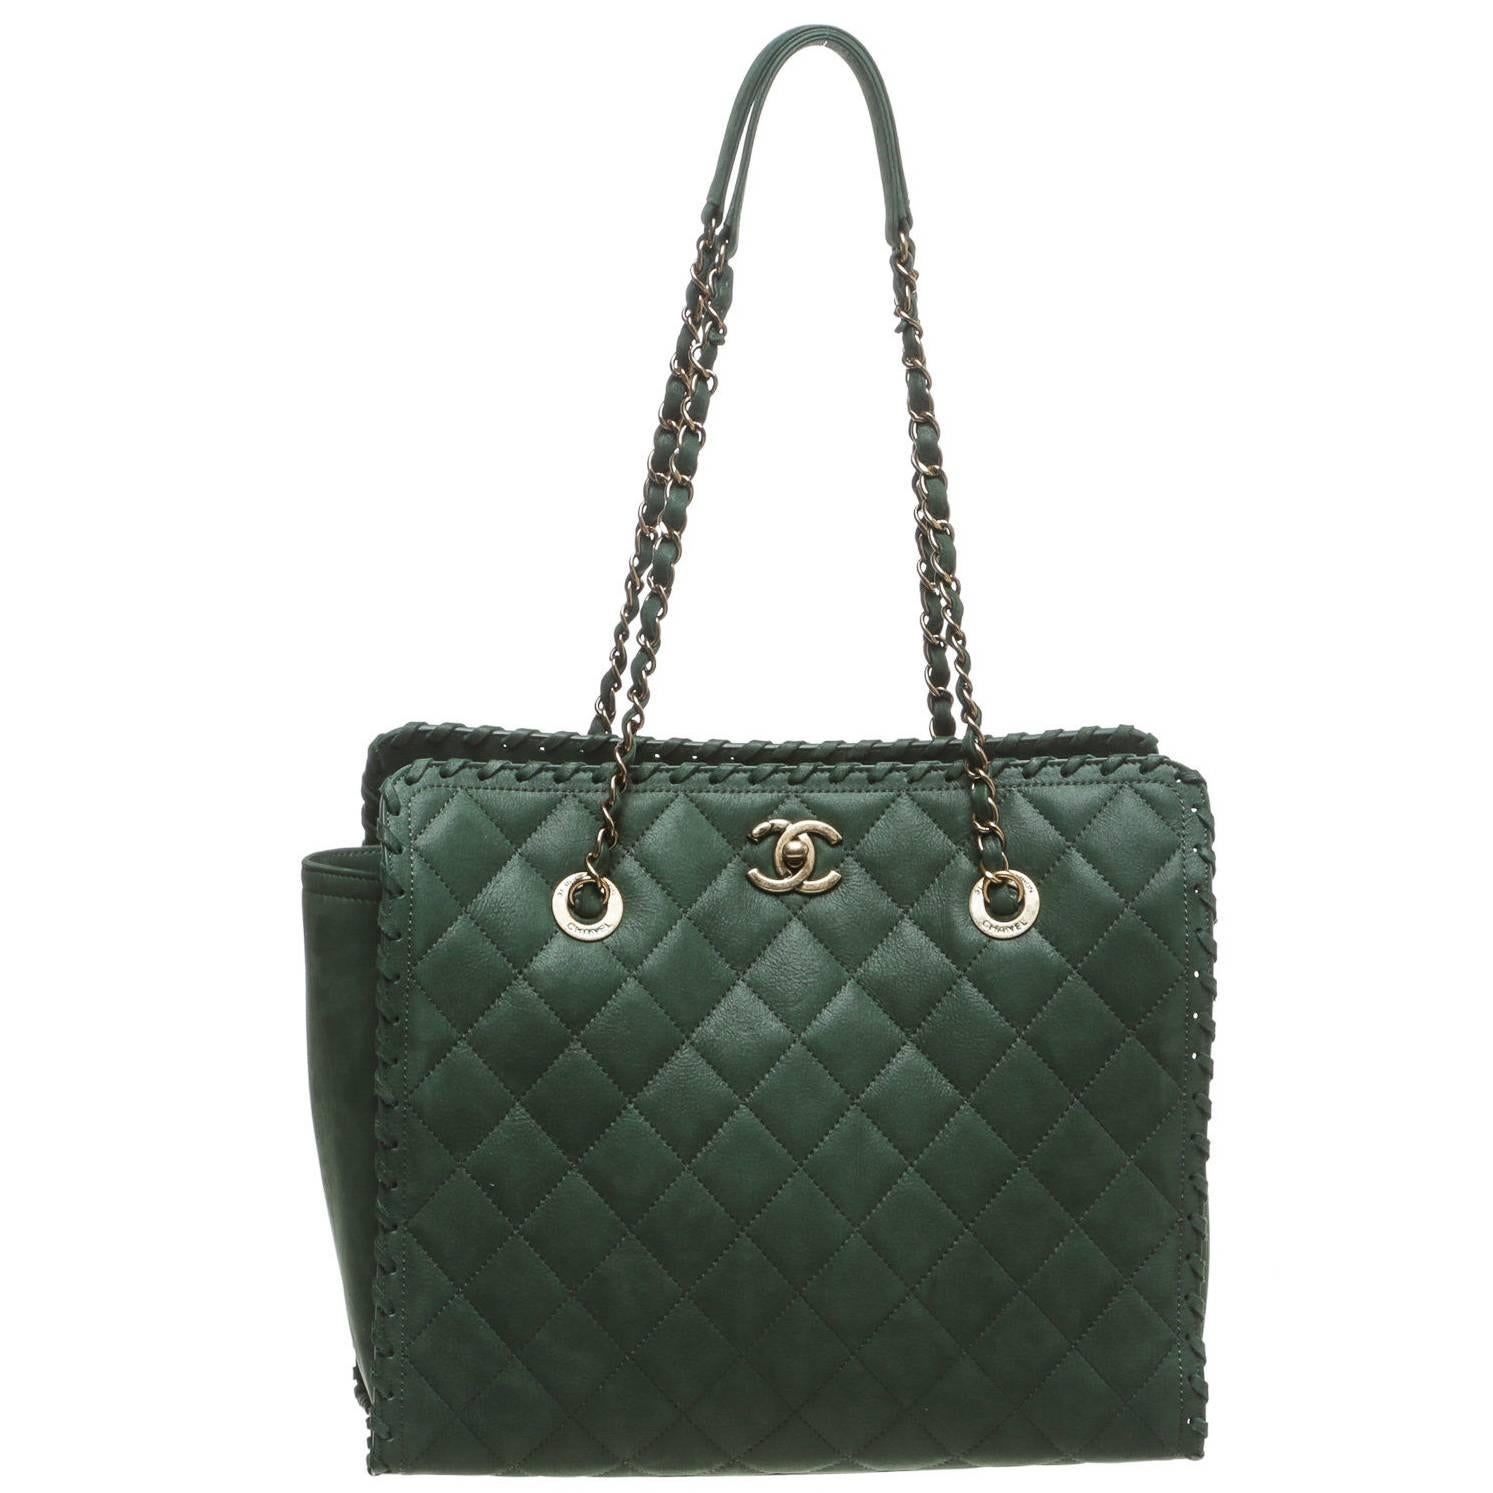 Chanel Green Suede Whipstitch Tote Handbag For Sale